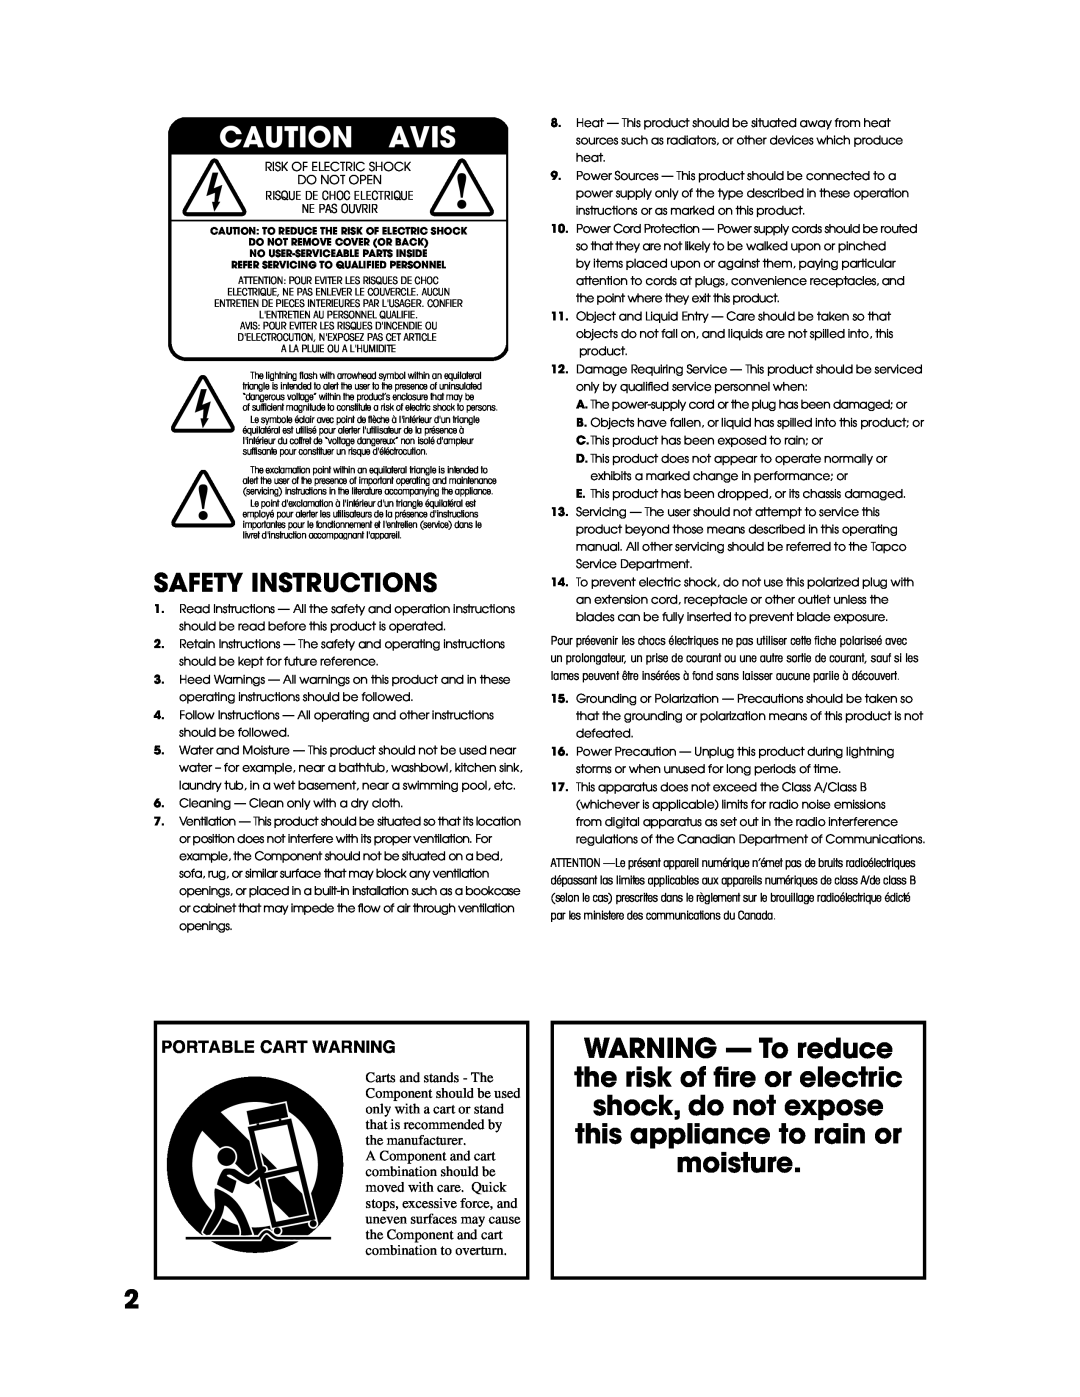 Tapco T-231 user service Safety Instructions, Caution Avis, Portable Cart Warning 